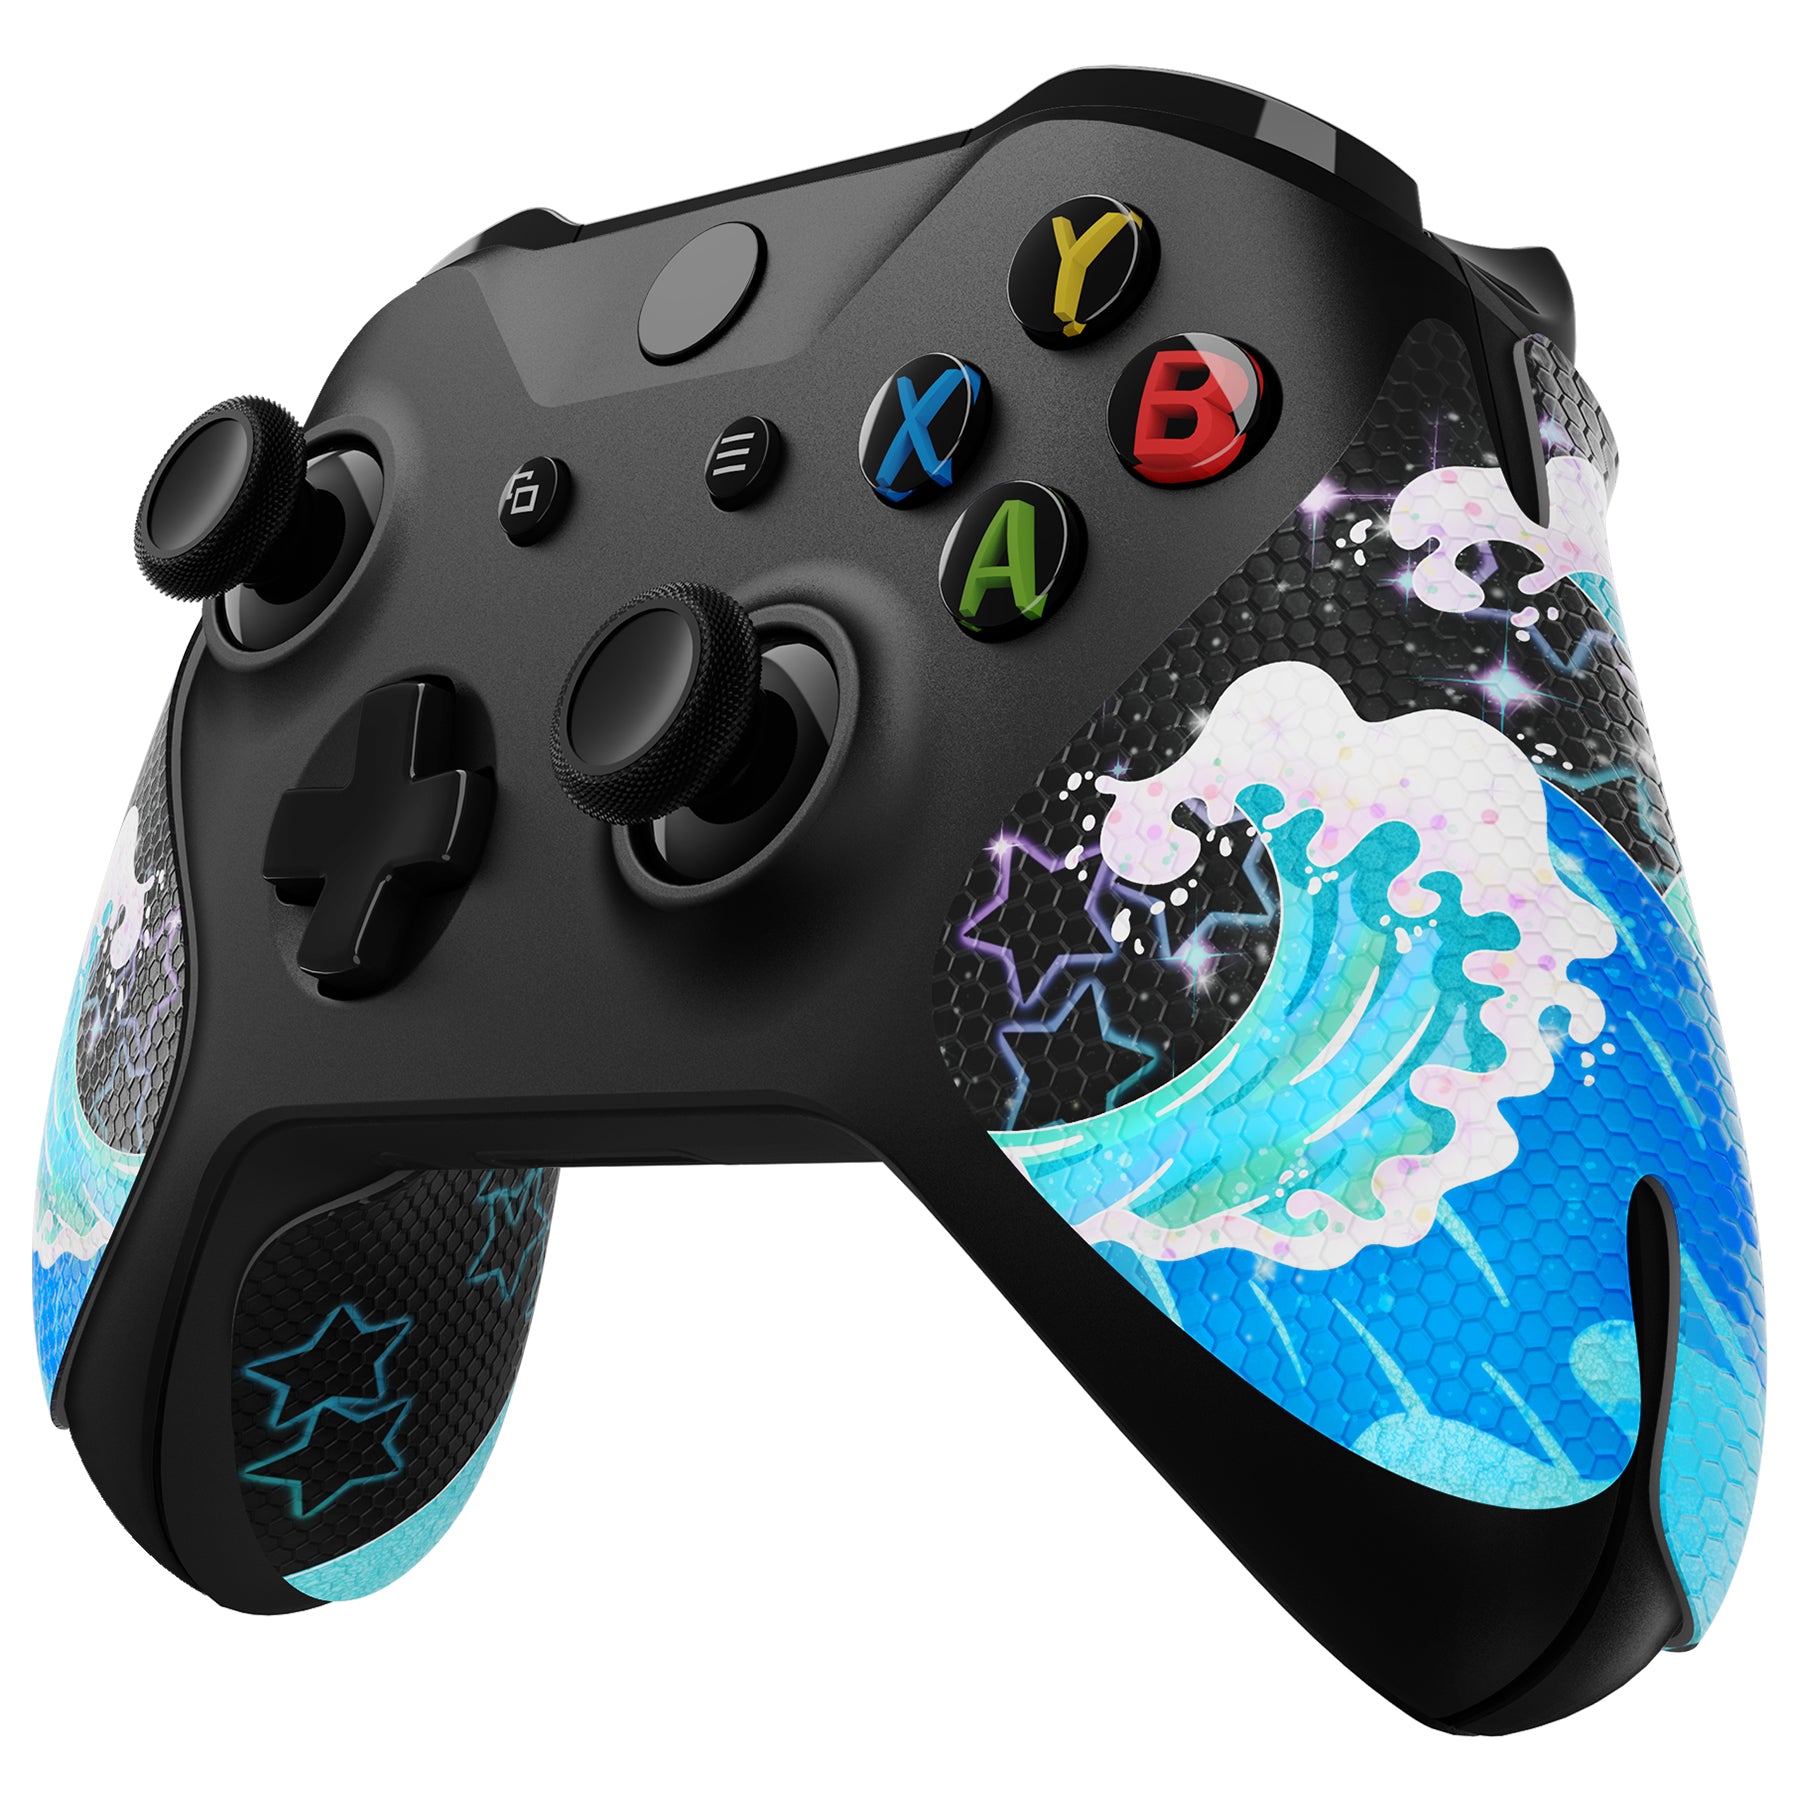 is it possible to get a controller with paddles for Xbox one (s)? : r/ xboxone